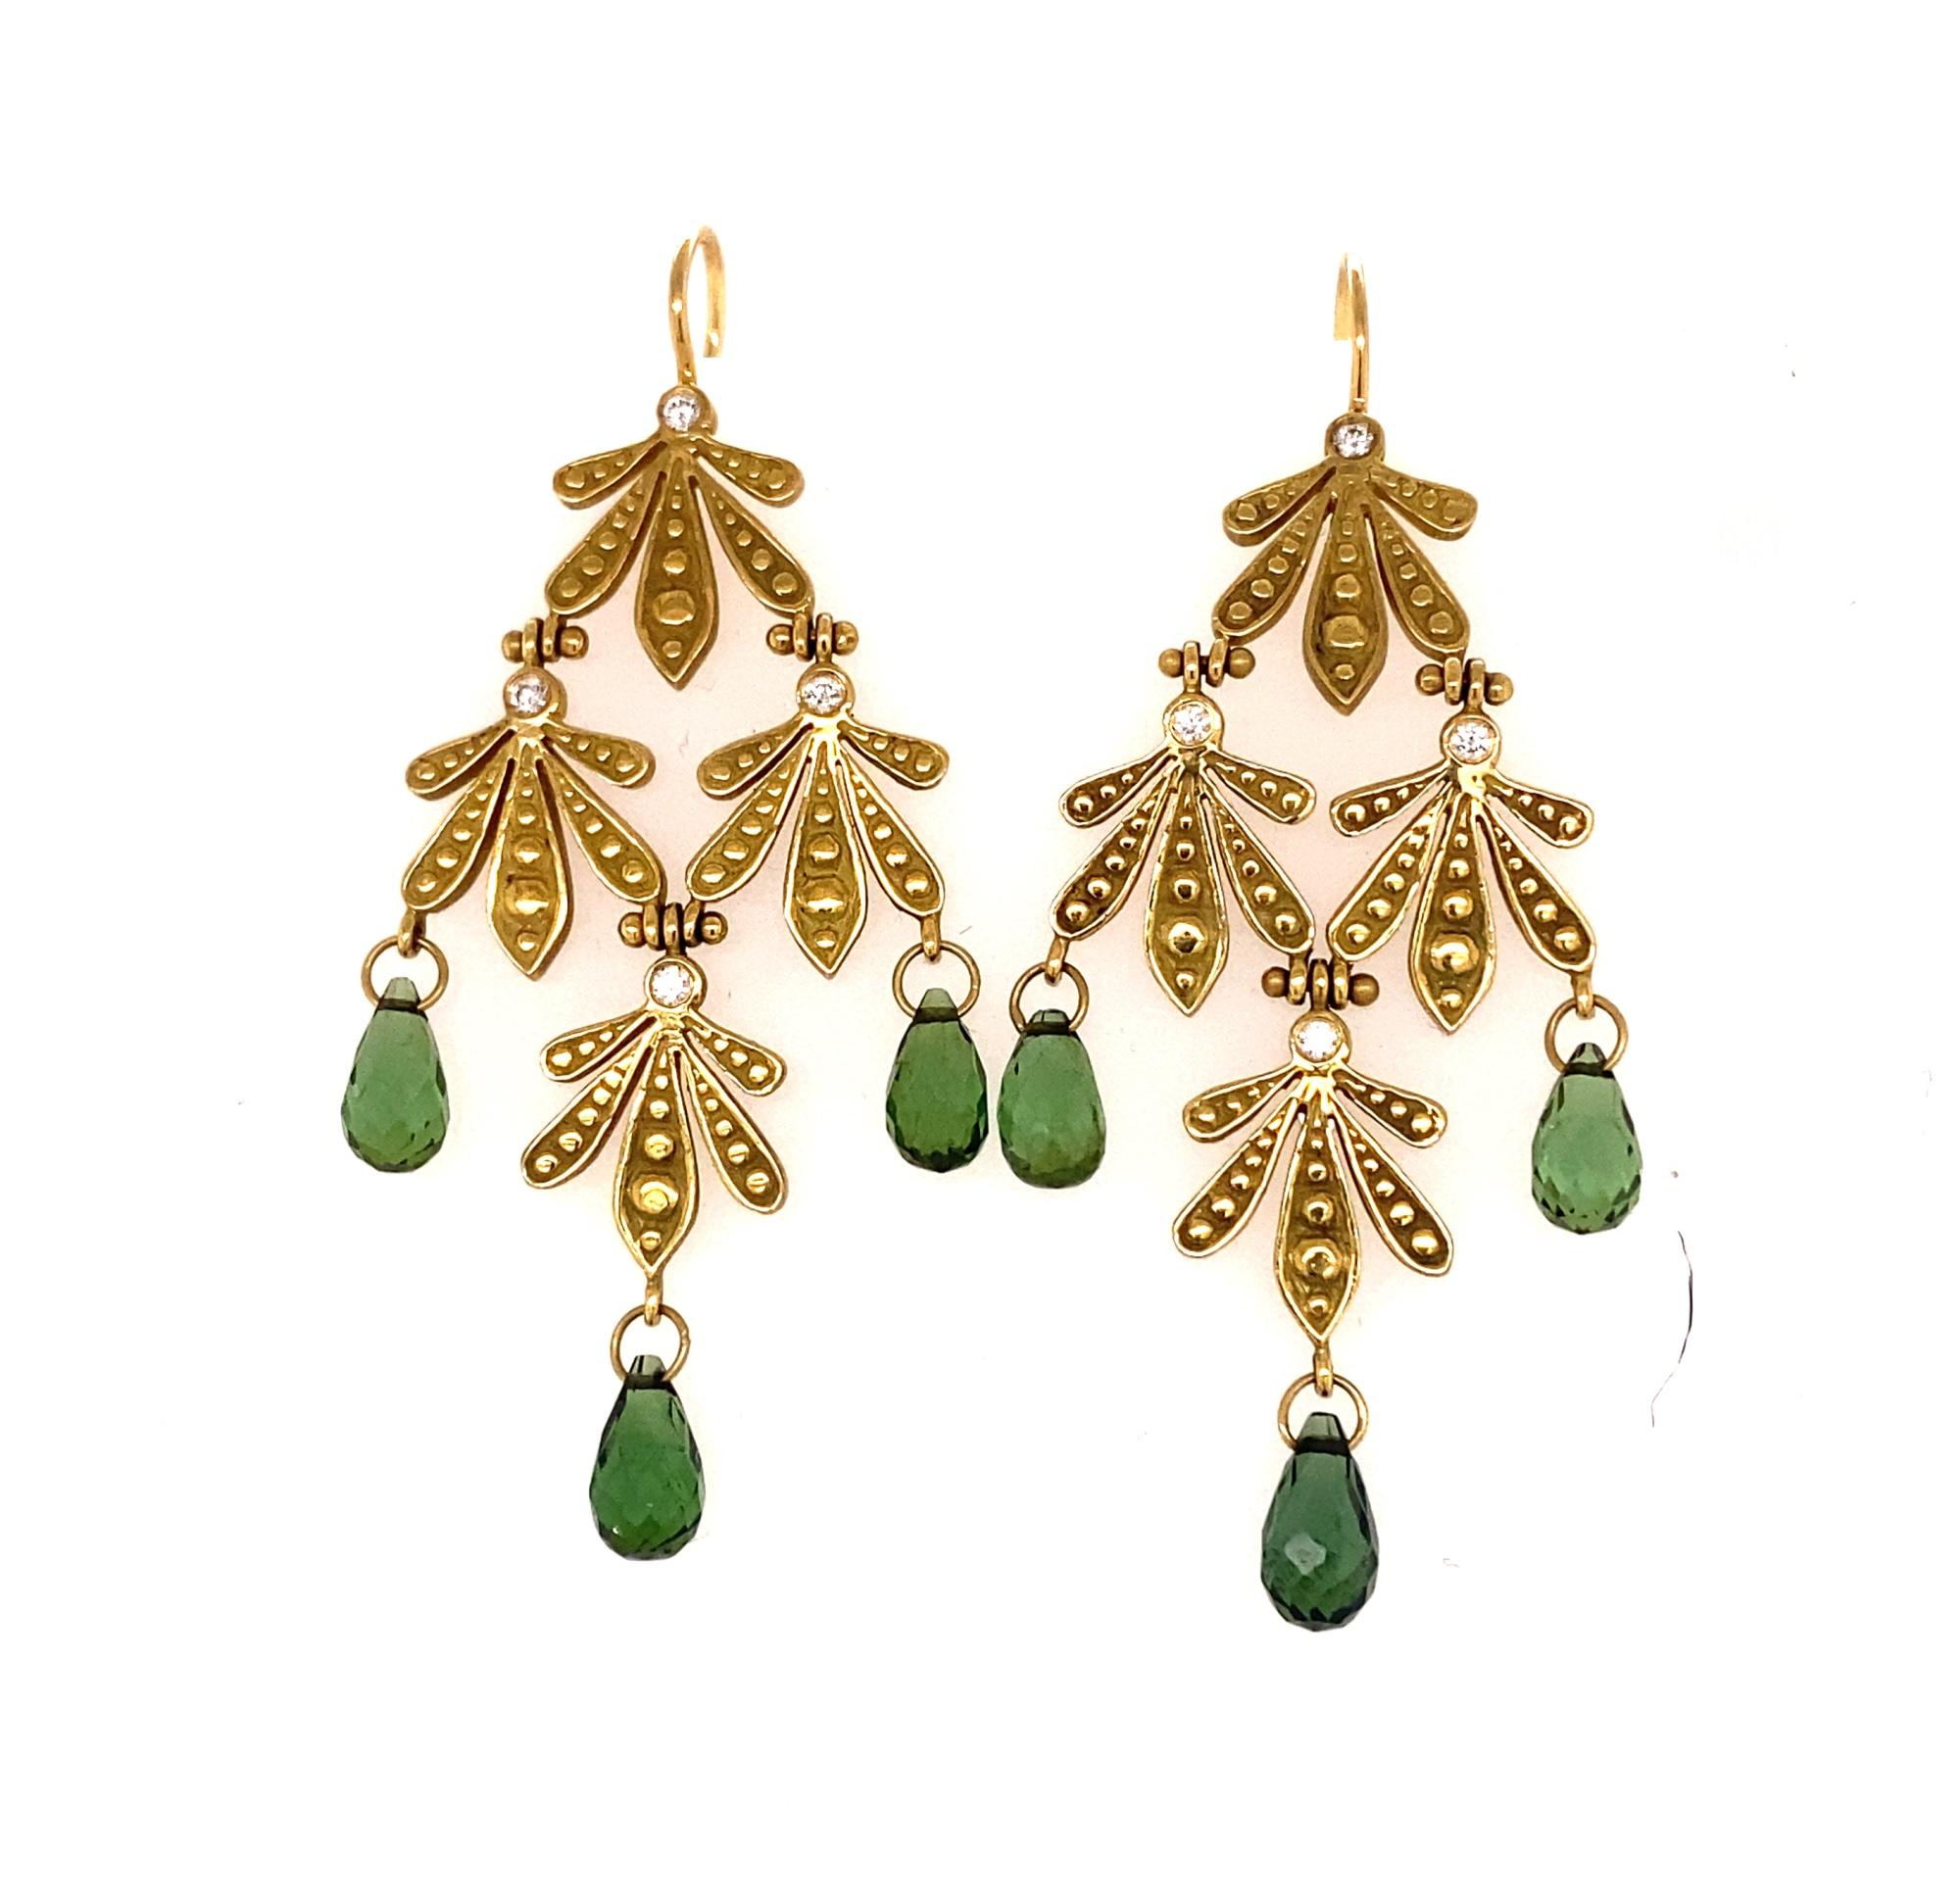 This is a stunning pair of dangle earrings by important New York designer Jamie Wolf. The earrings have a natural leaf like design with four moveable sections.  Earrings have 6 briolette cut green tourmalines and 8 diamonds I color VS-2 clarity. 